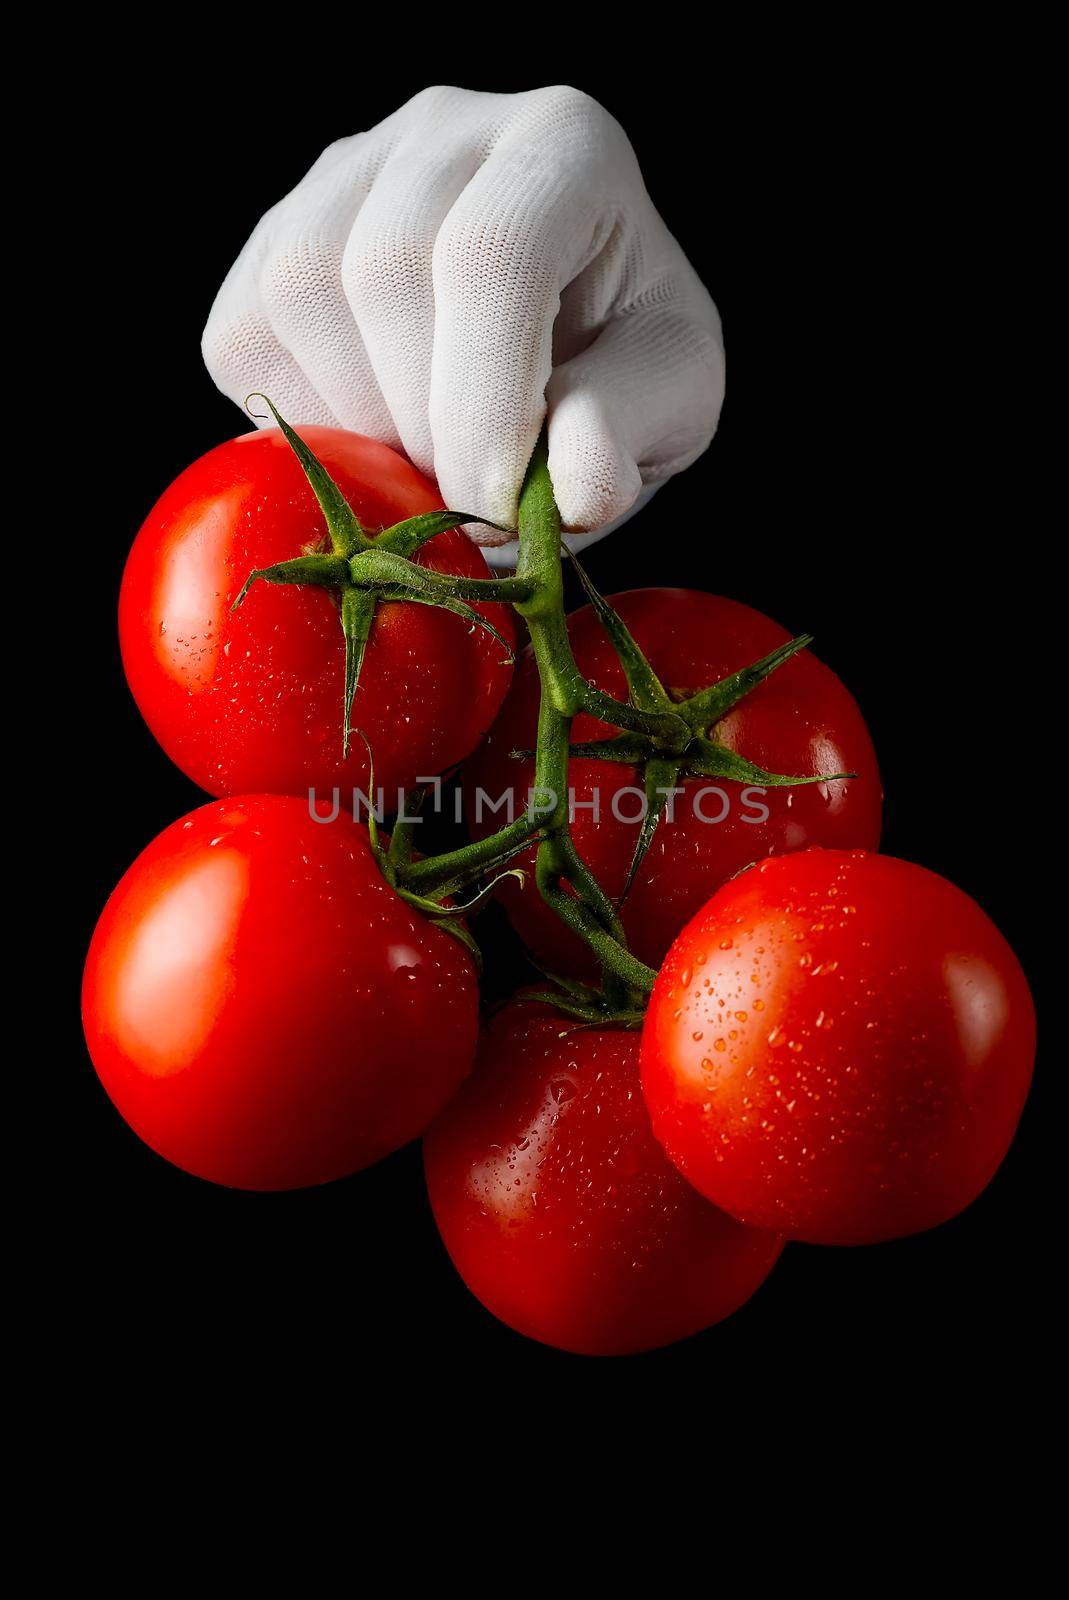 Fine fresh ripe red tomatoes held by a hand in white glove on black background. isolated on black